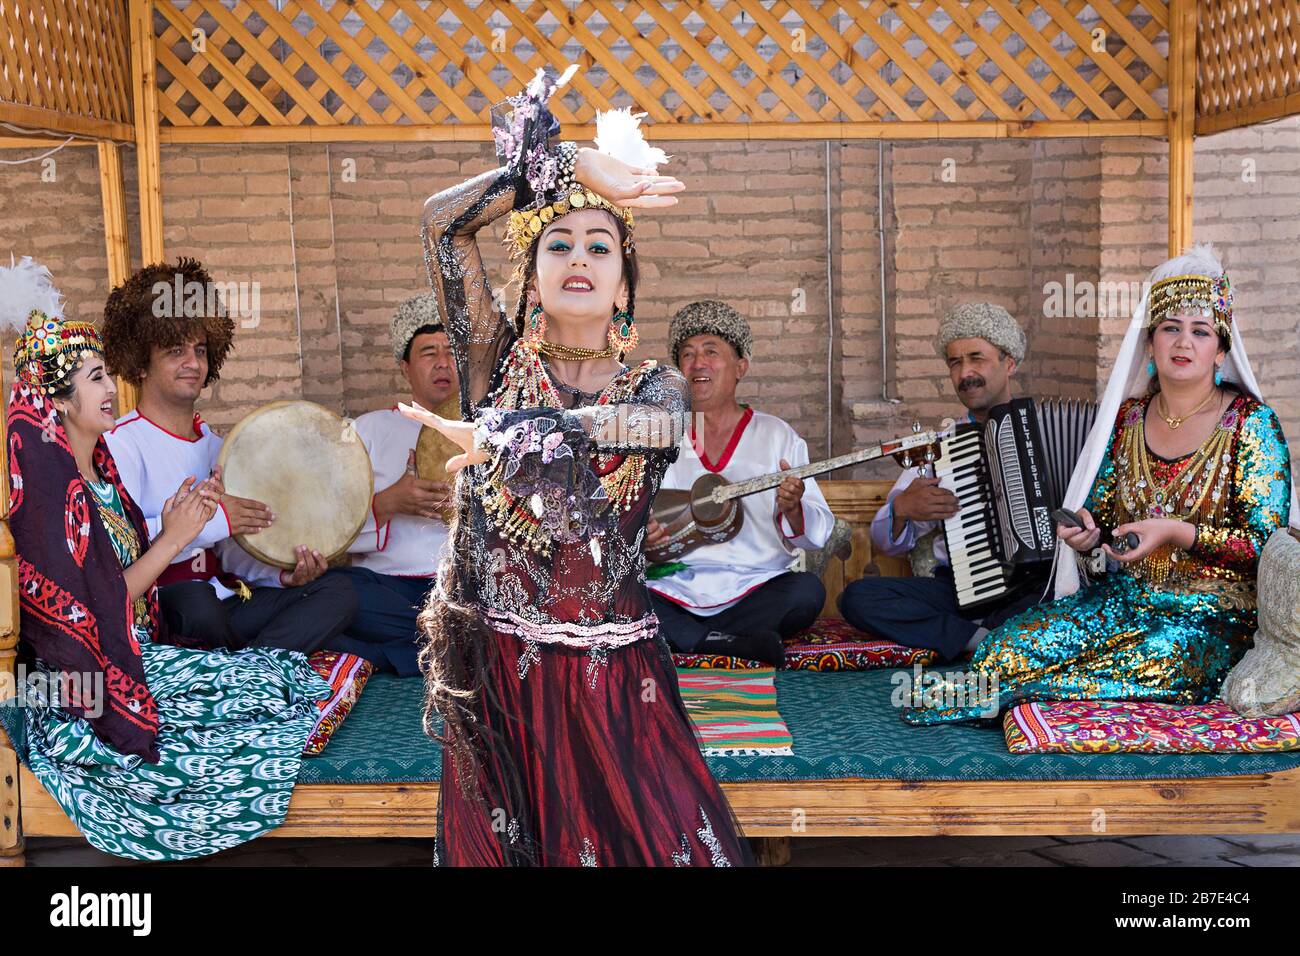 Local musicians playing and Uzbek woman in traditional costumes dancing in Khiva, Uzbekistan Stock Photo